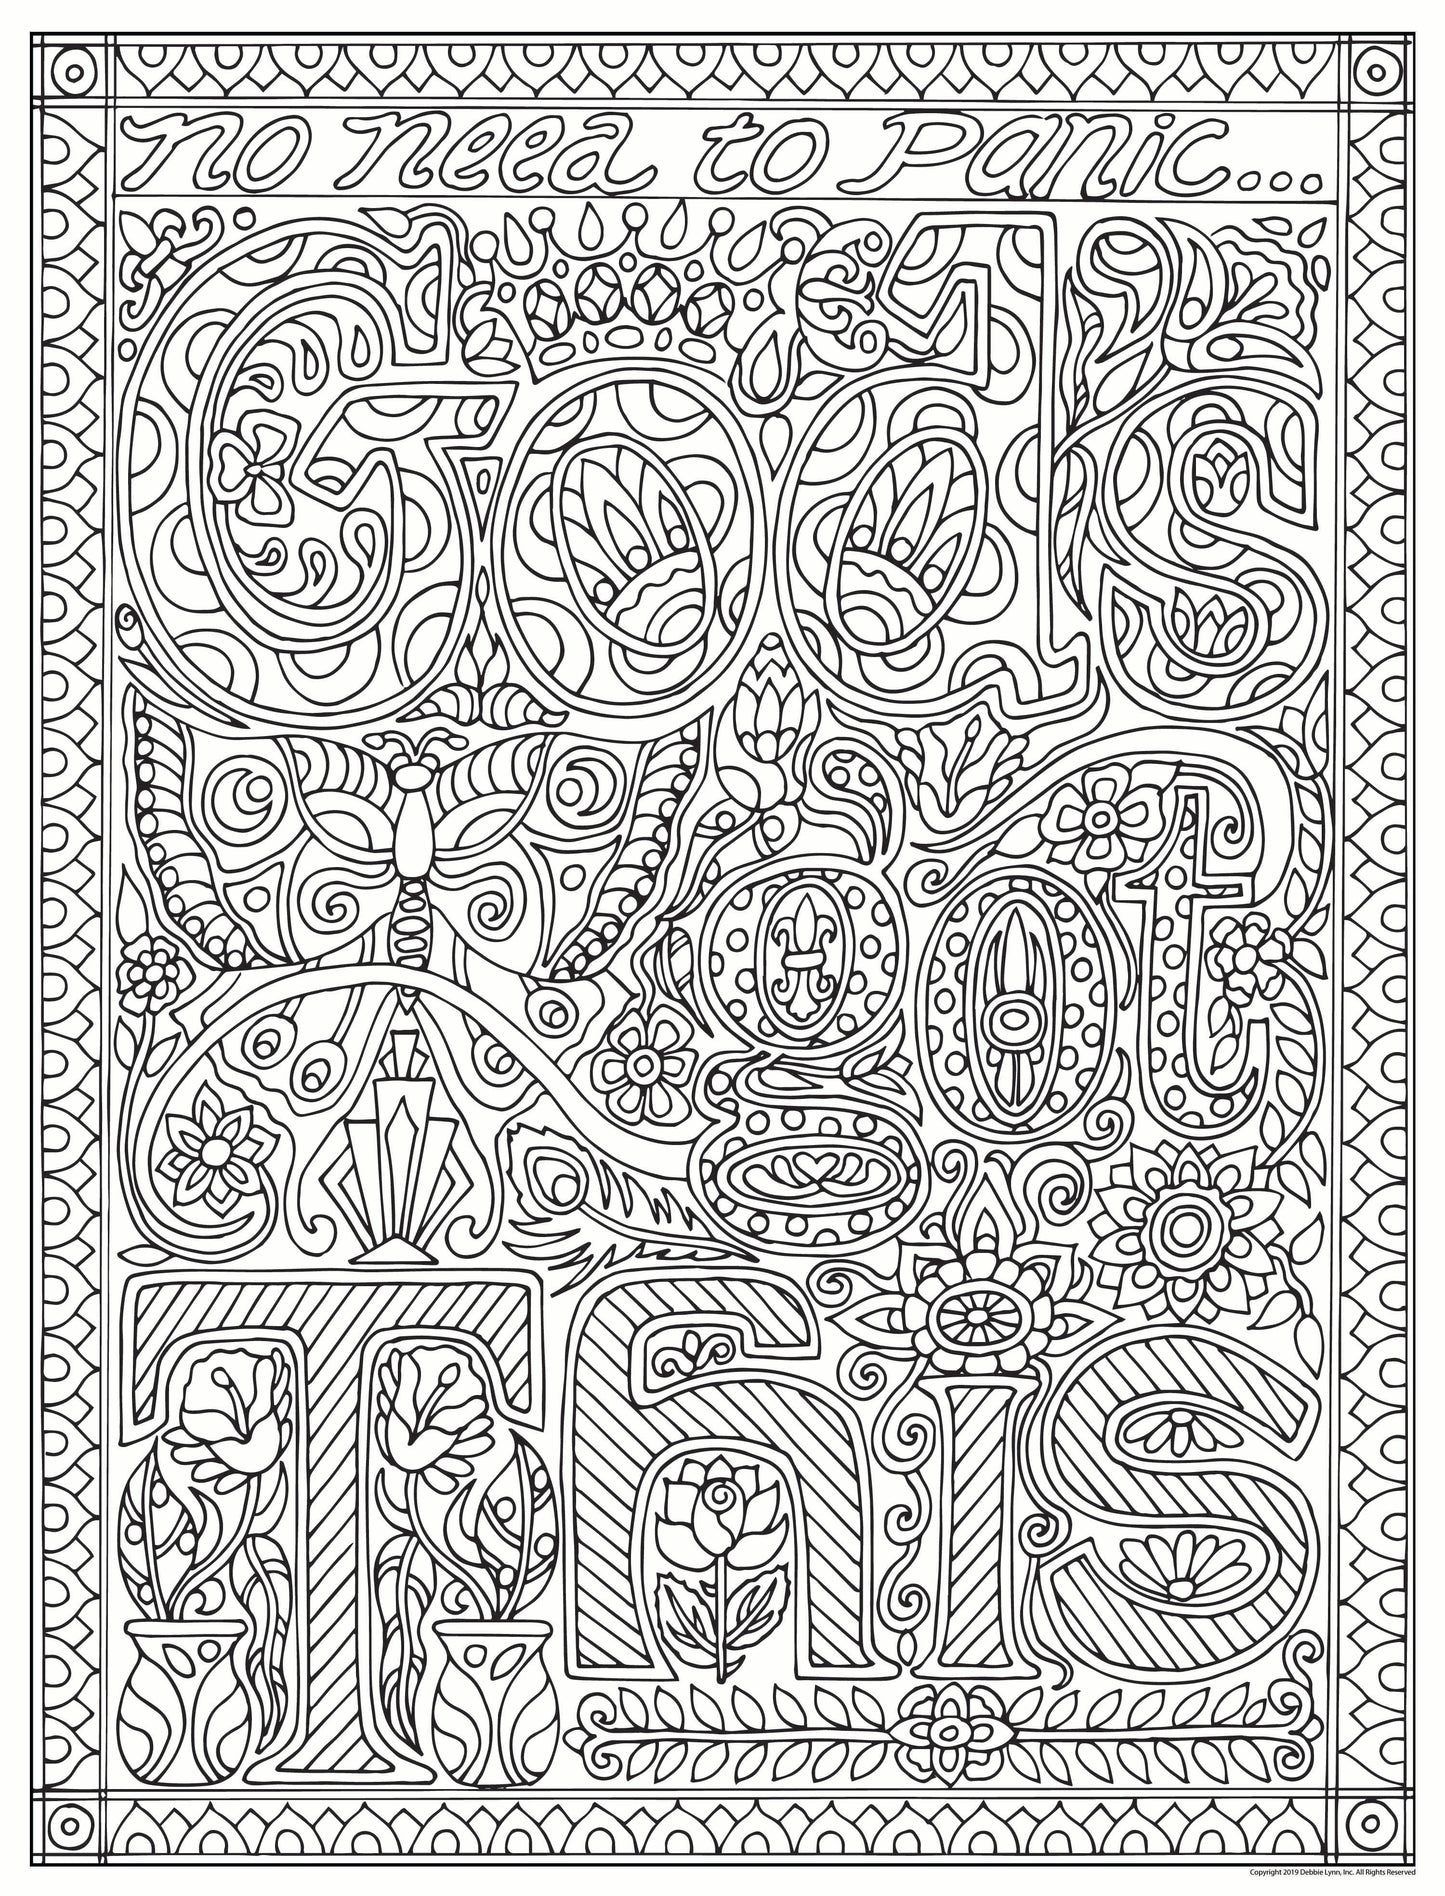 GOD'S GOT THIS-FAITH PERSONALIZED GIANT COLORING POSTER 46"x60"